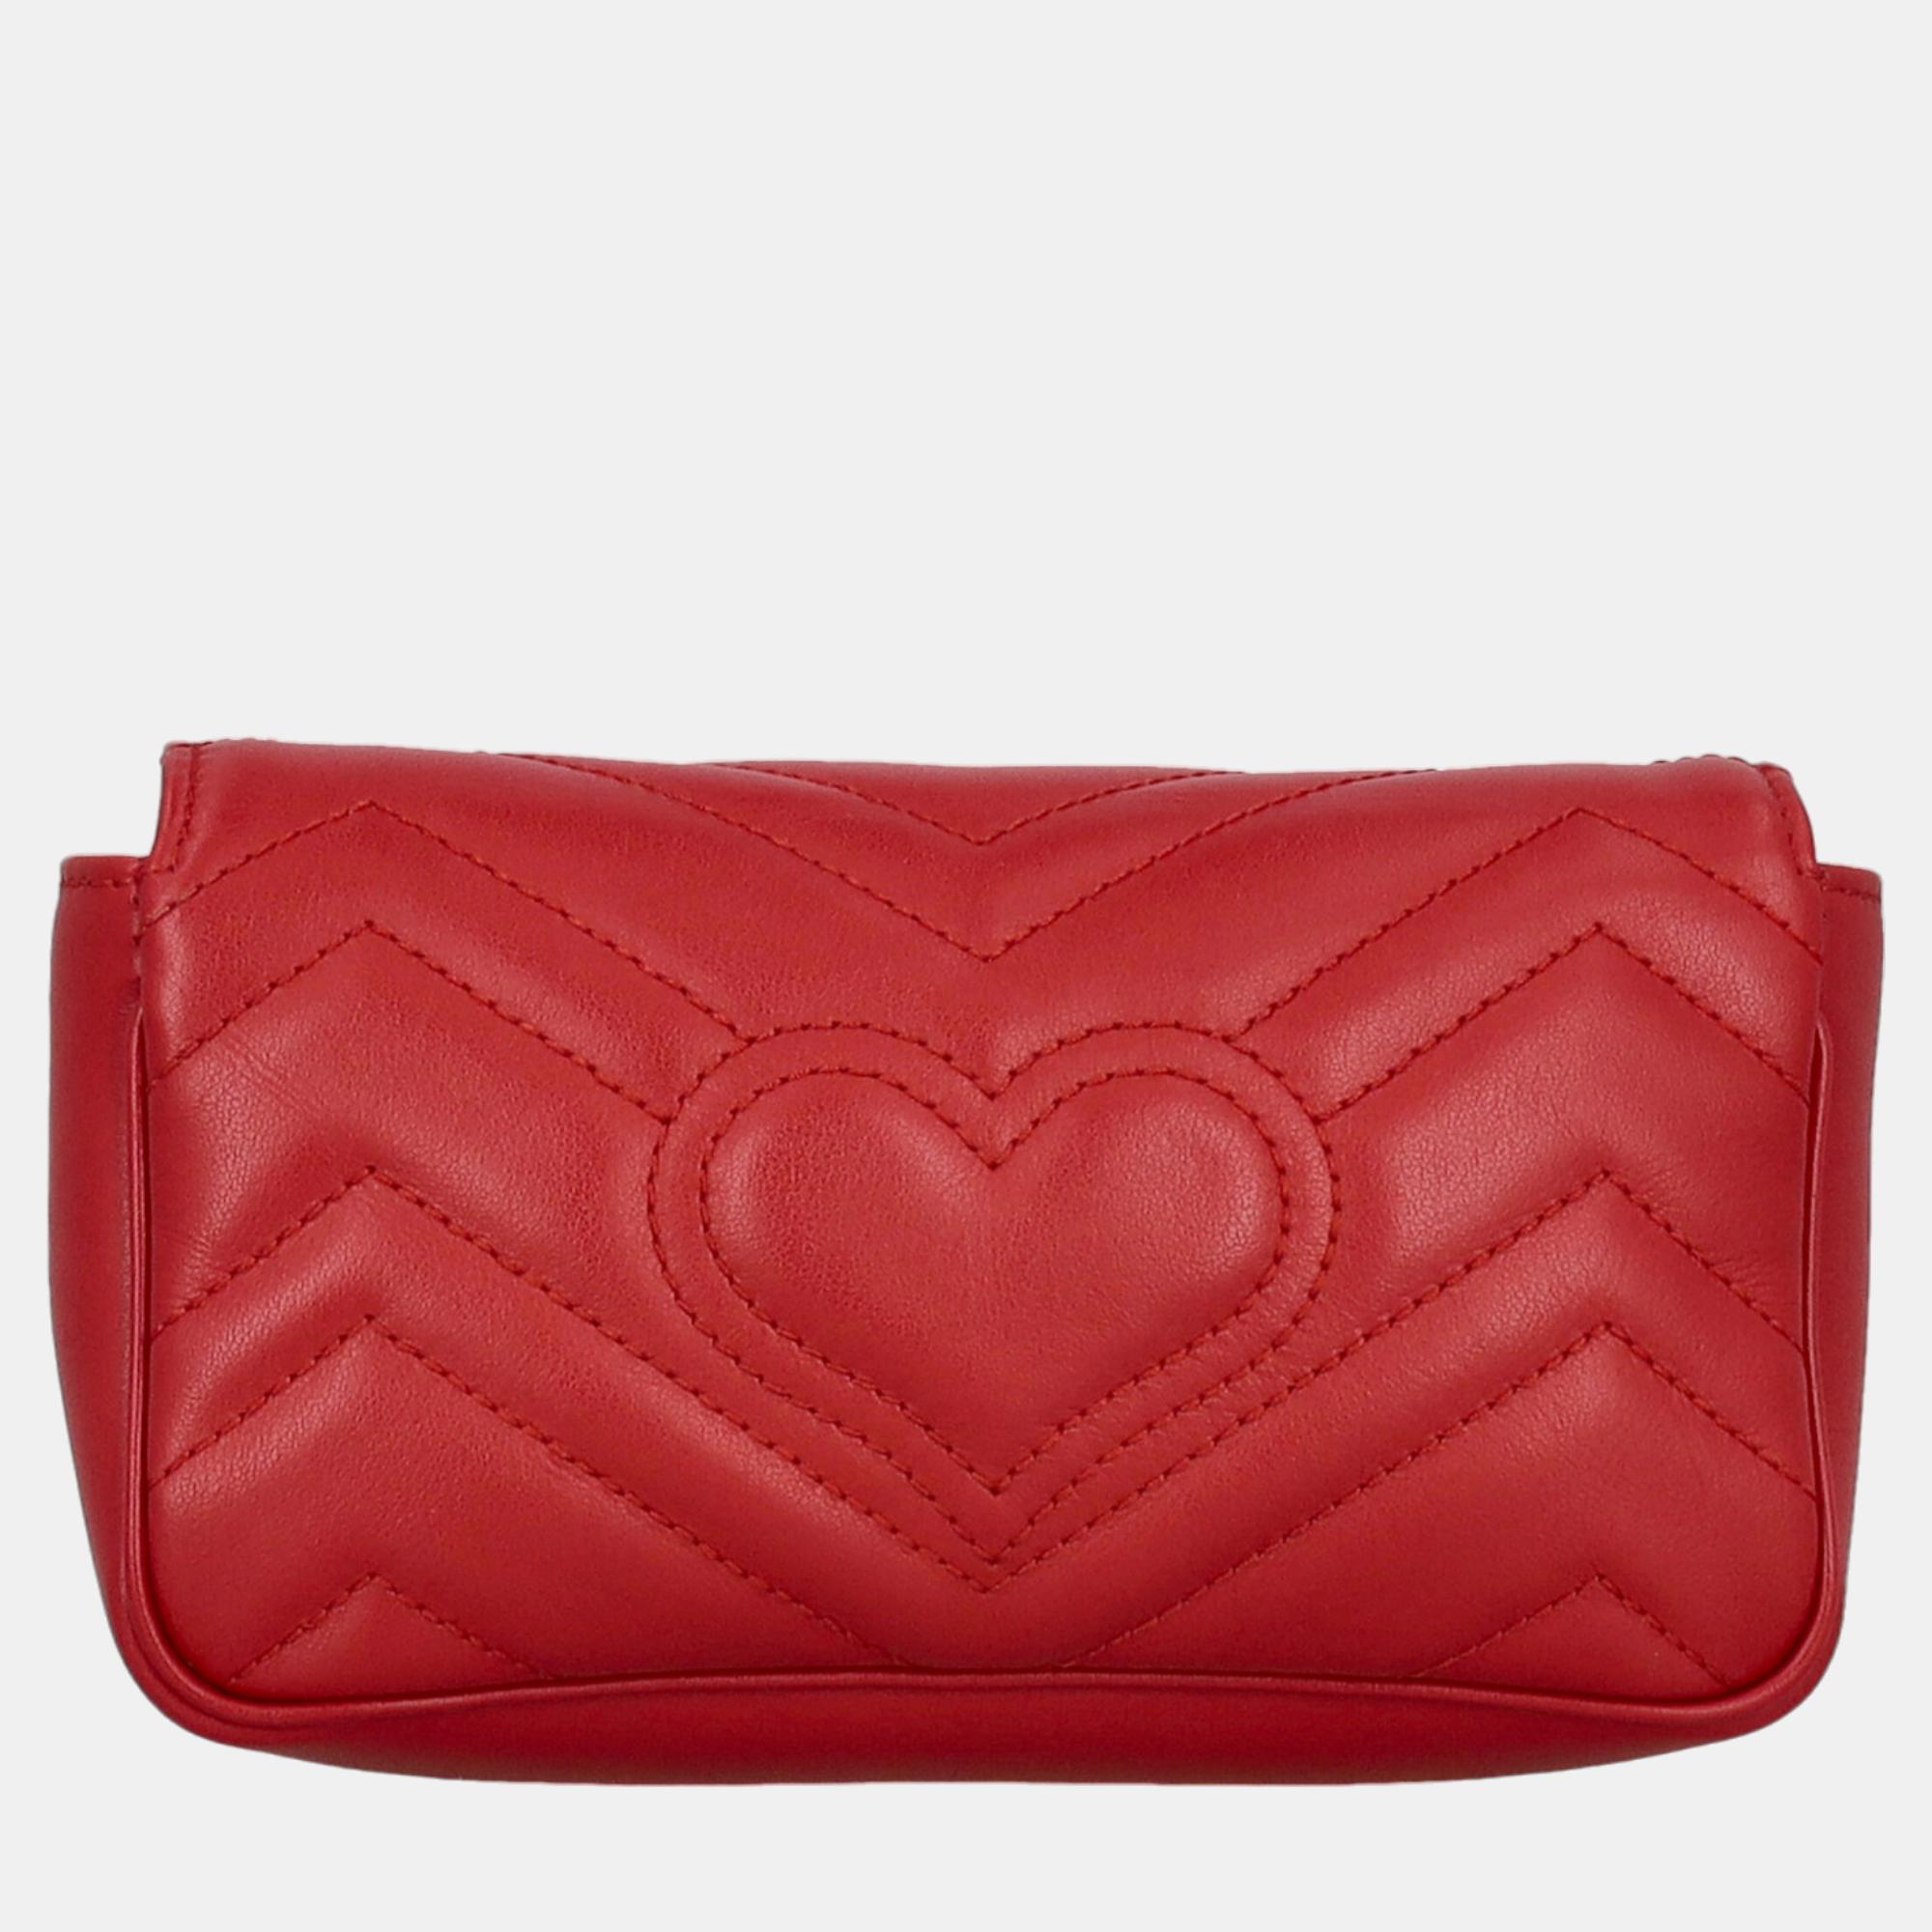 Gucci Marmont -  Women's Leather Cross Body Bag - Red - One Size